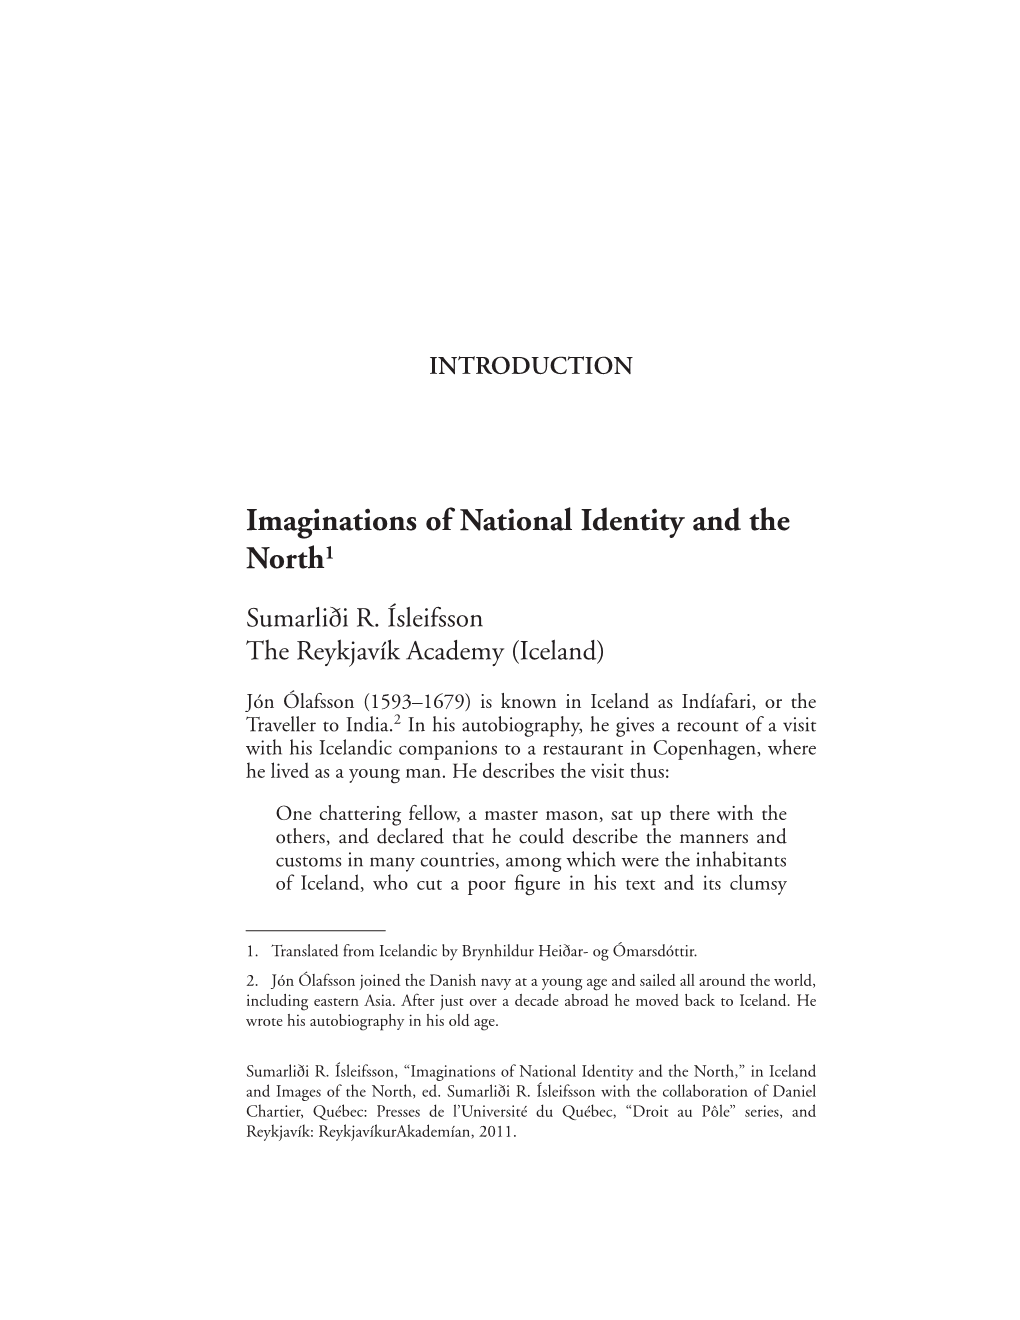 Imaginations of National Identity and the North1